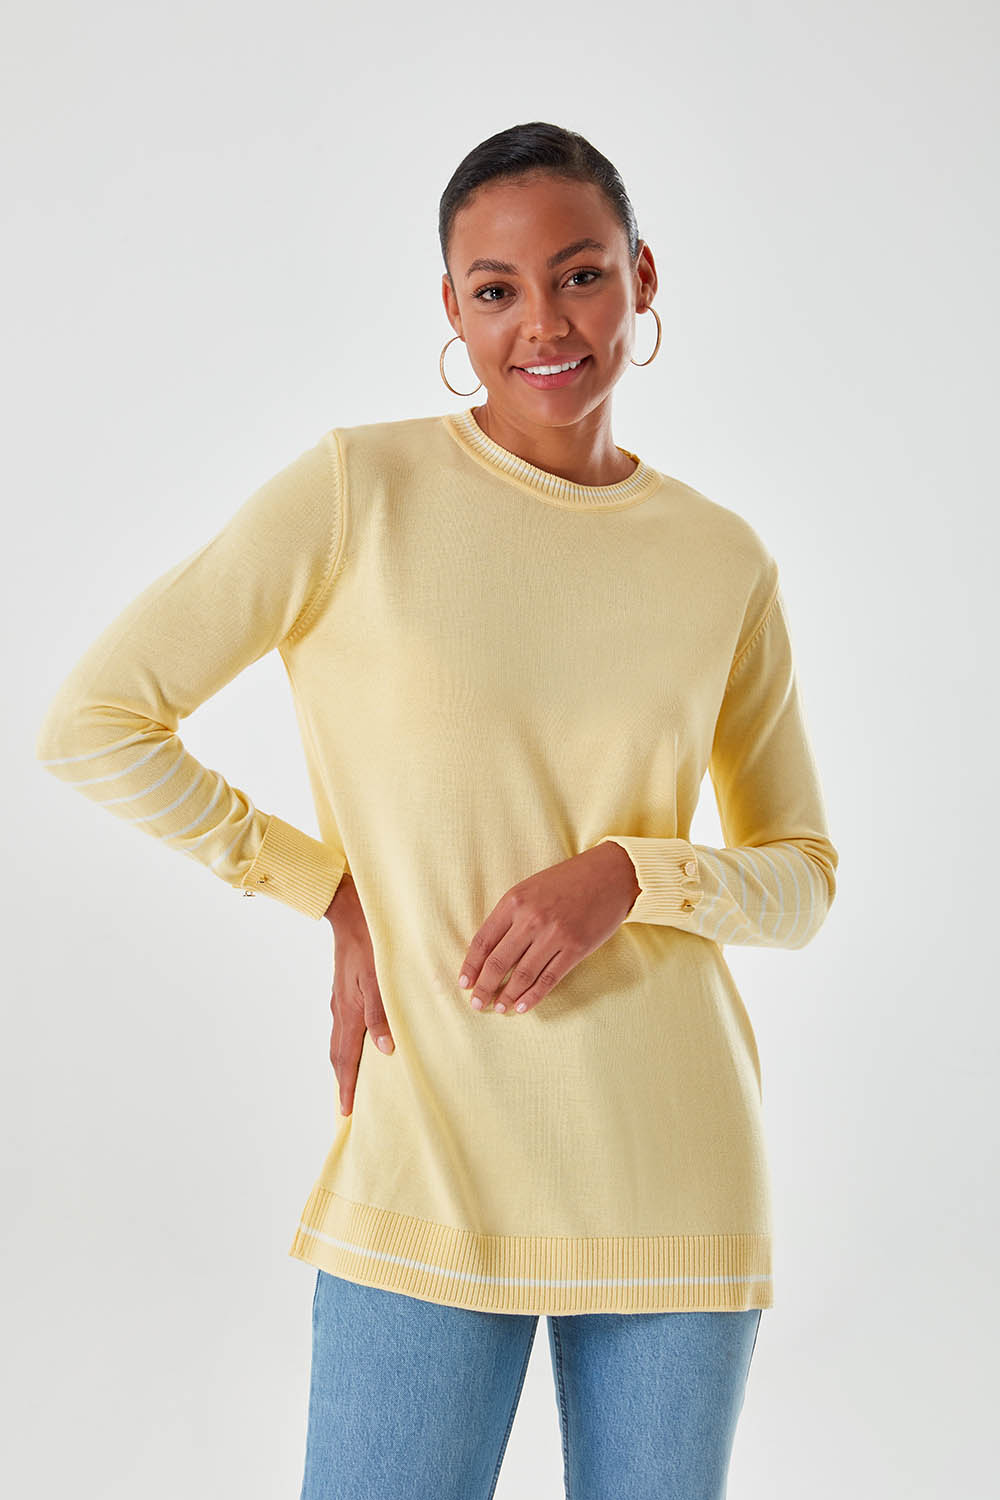 Yellow Knitwear Tunic with Stripe Sleeves Patterned